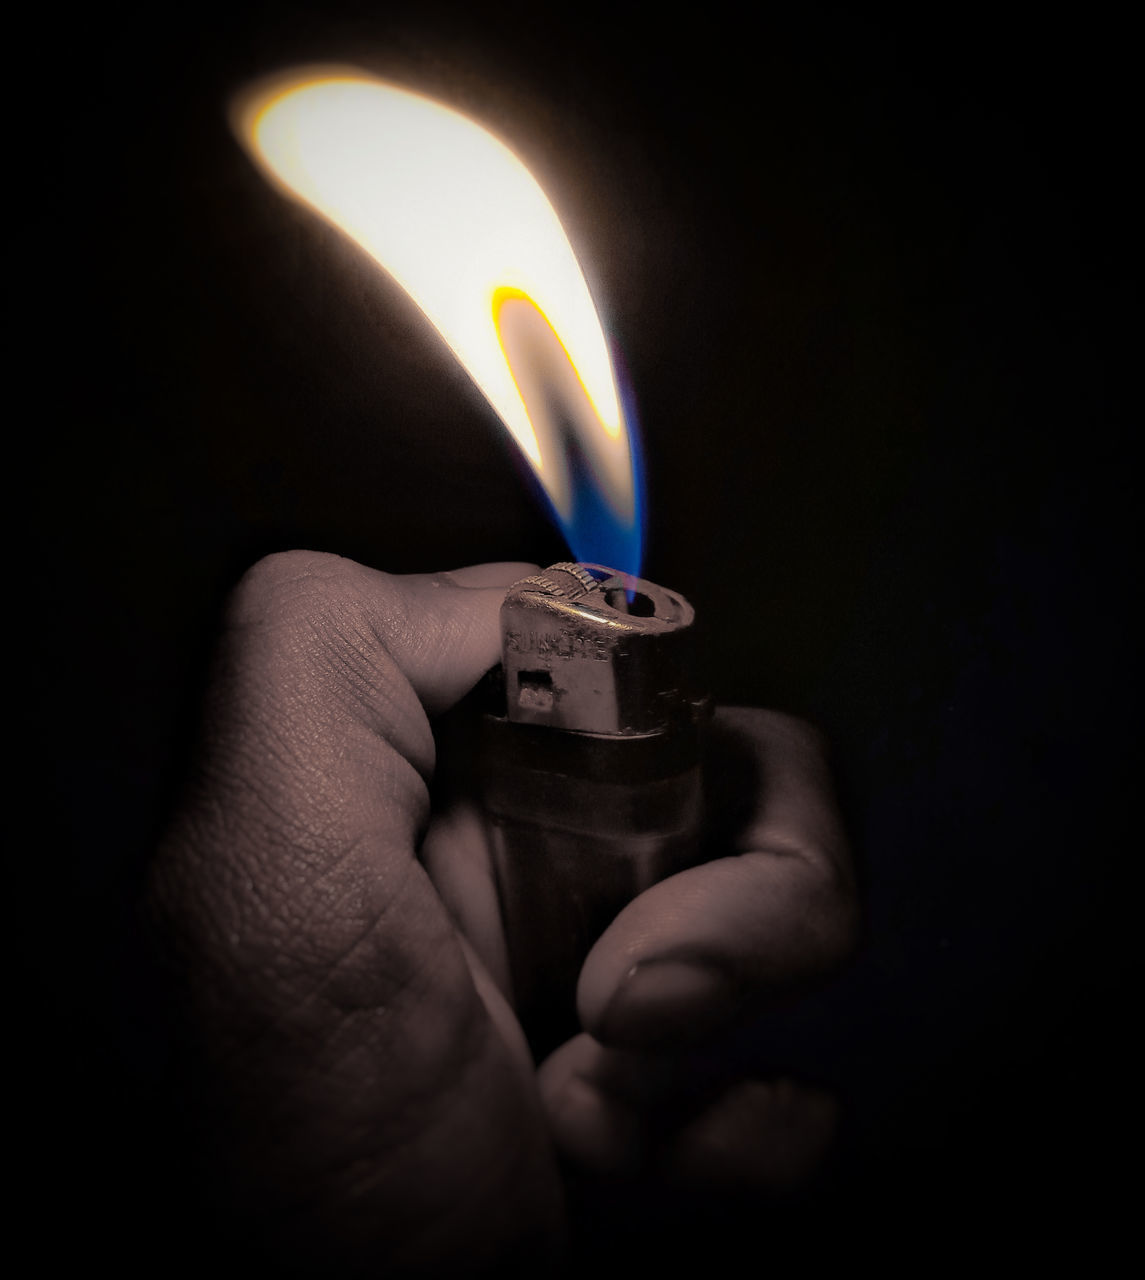 burning, fire, flame, hand, darkness, light, heat, holding, finger, indoors, close-up, igniting, black background, one person, candle, glowing, studio shot, illuminated, lighting, cigarette lighter, white, black, dark, single object, lighting equipment, adult